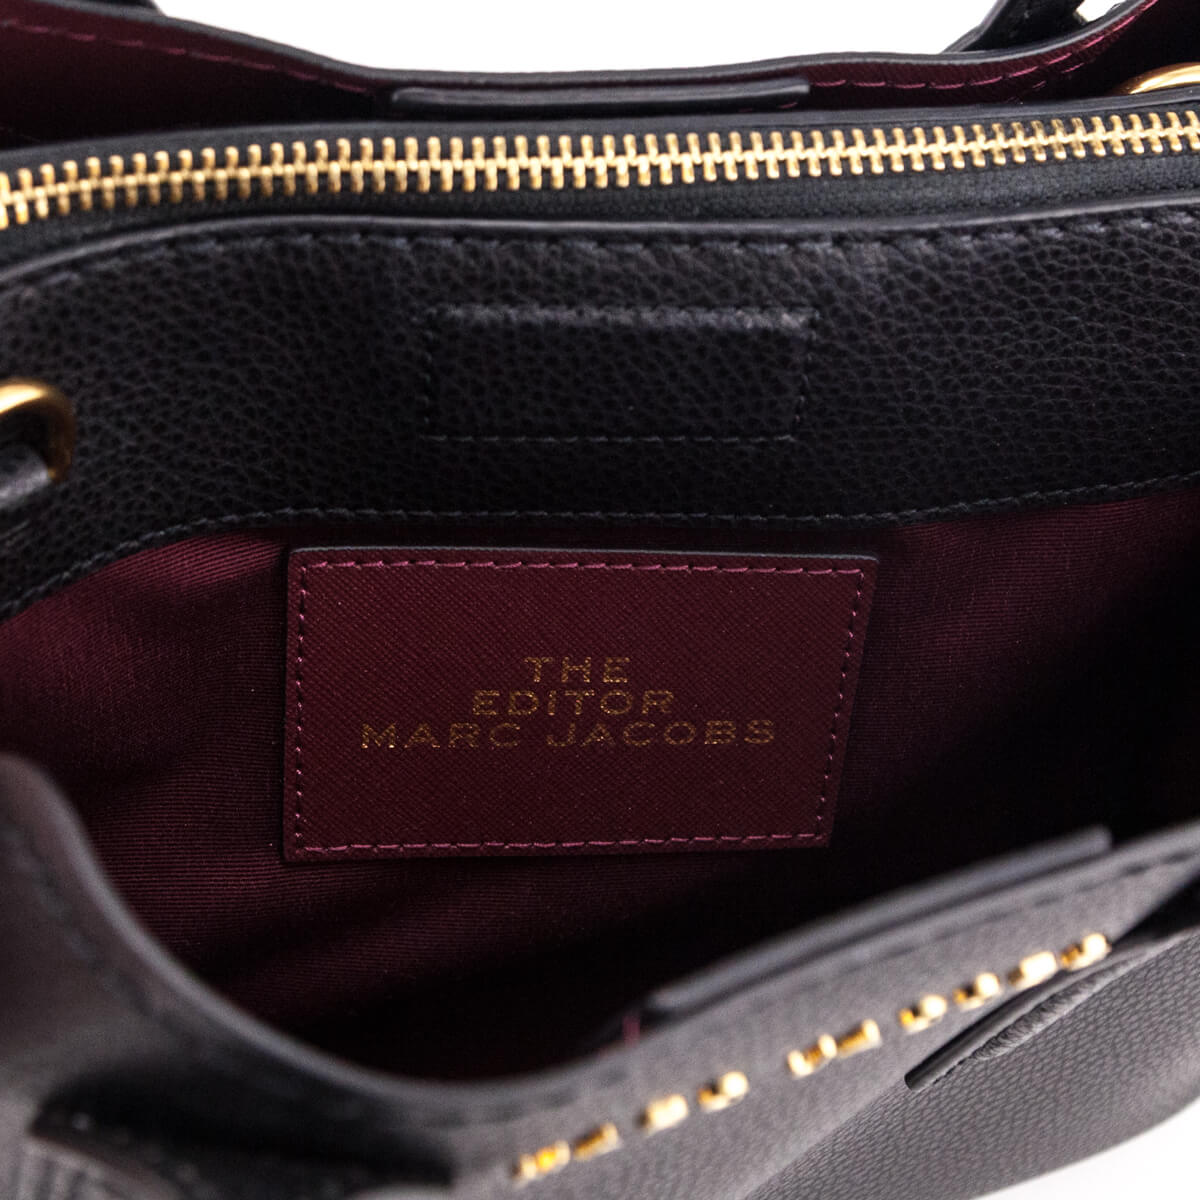 Marc Jacobs Black The Editor 29 Leather Crossbody Bag at FORZIERI